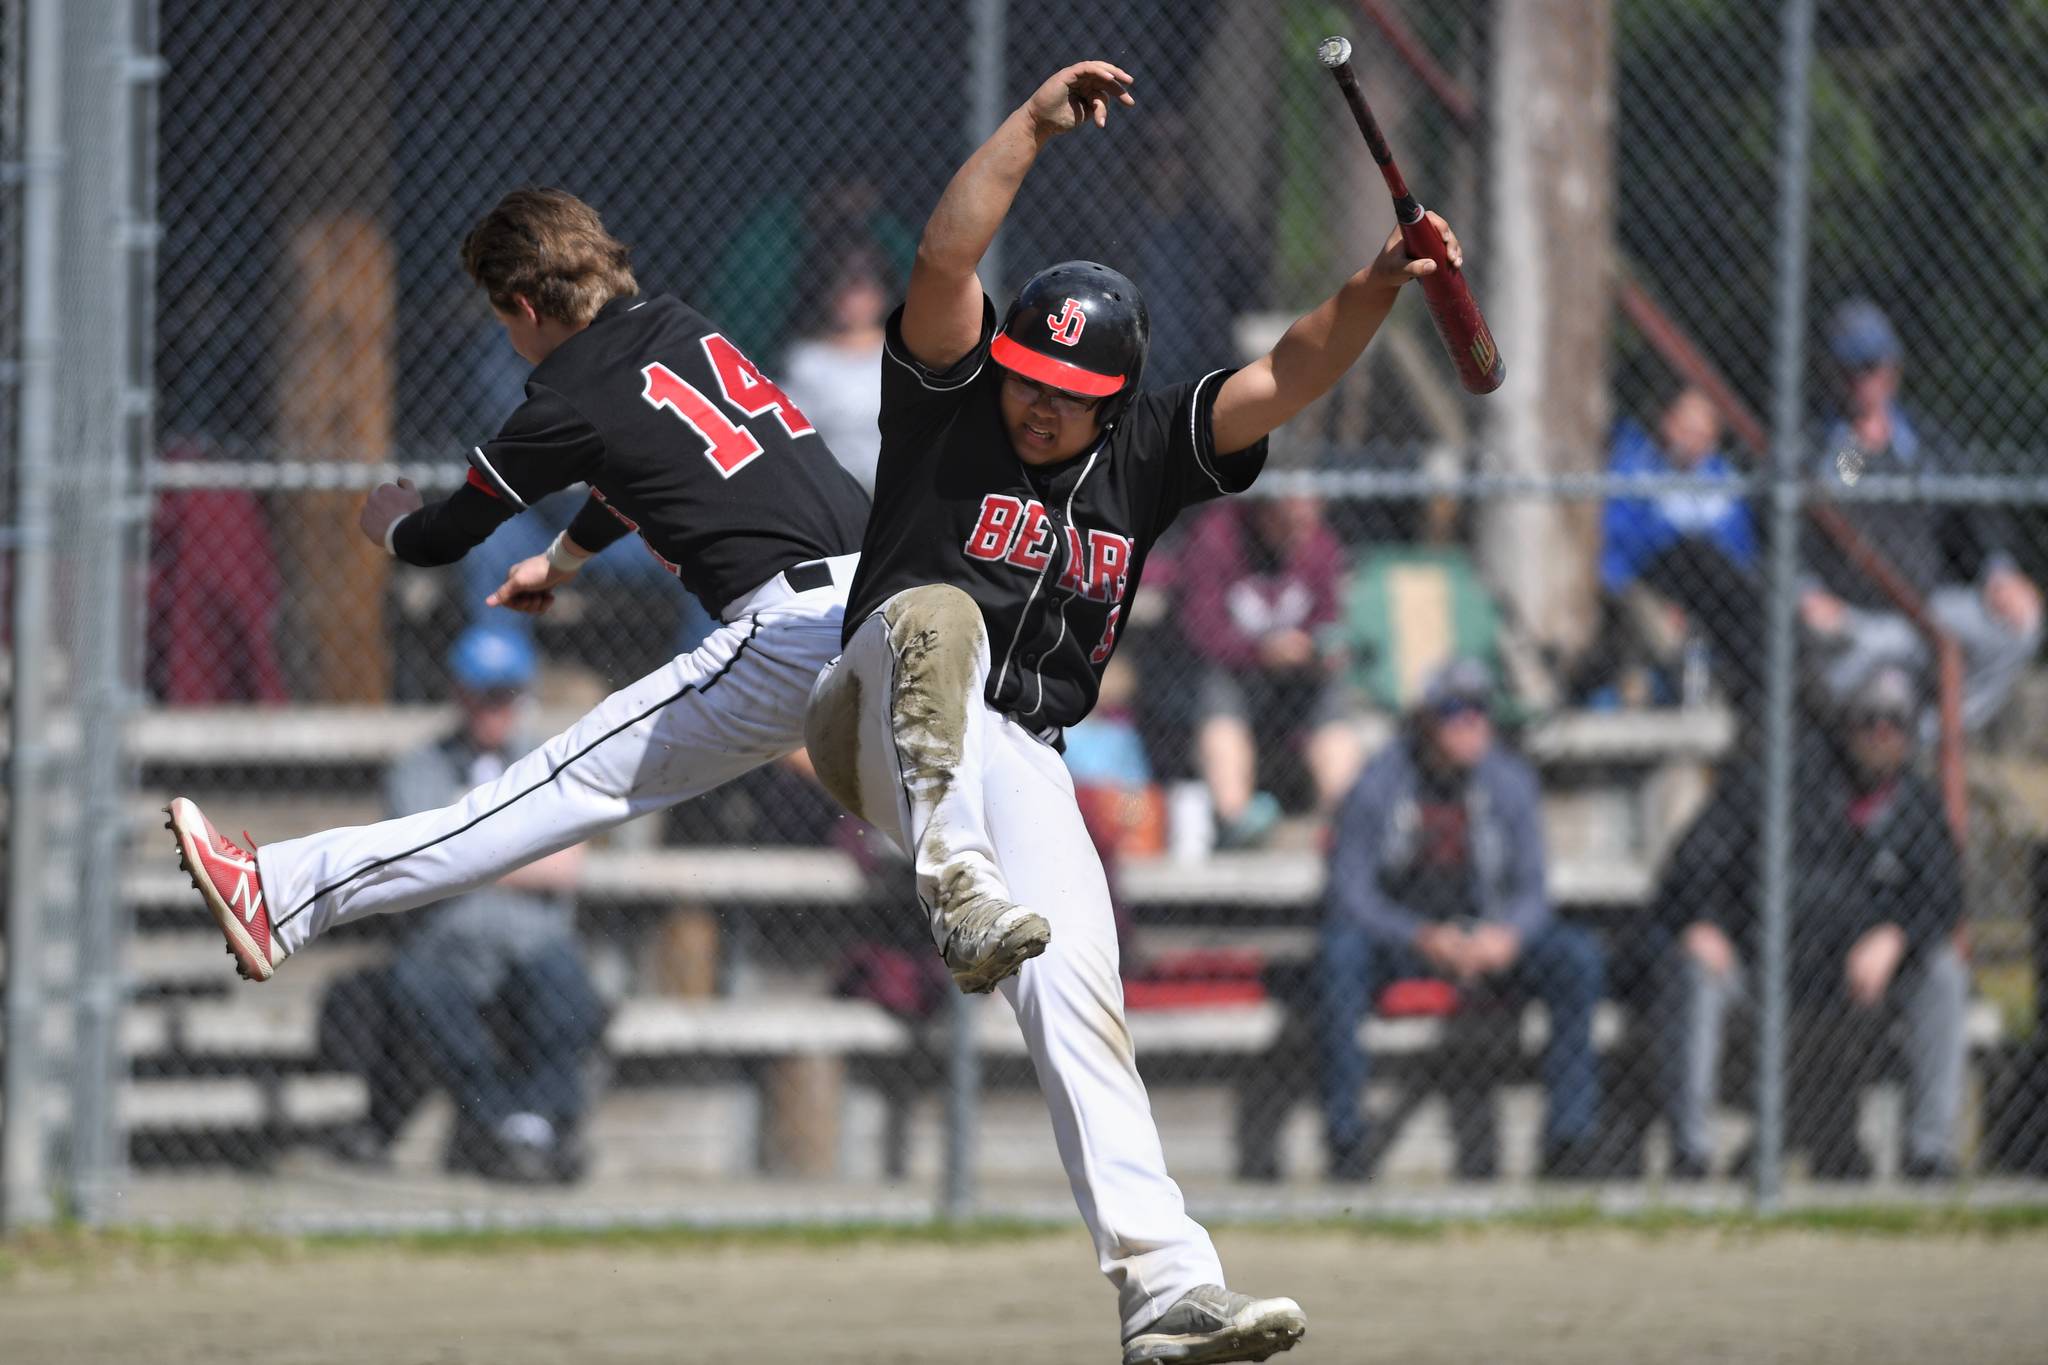 Juneau-Douglas’ Kona Ogoy, right, celebrates with teammate Austin McCurley after scoring the go-ahead run in the seventh inning against Ketchikan during the Region V Baseball Championship at Adair-Kennedy Memorial Park on Friday, May 24, 2019. (Michael Penn | Juneau Empire)